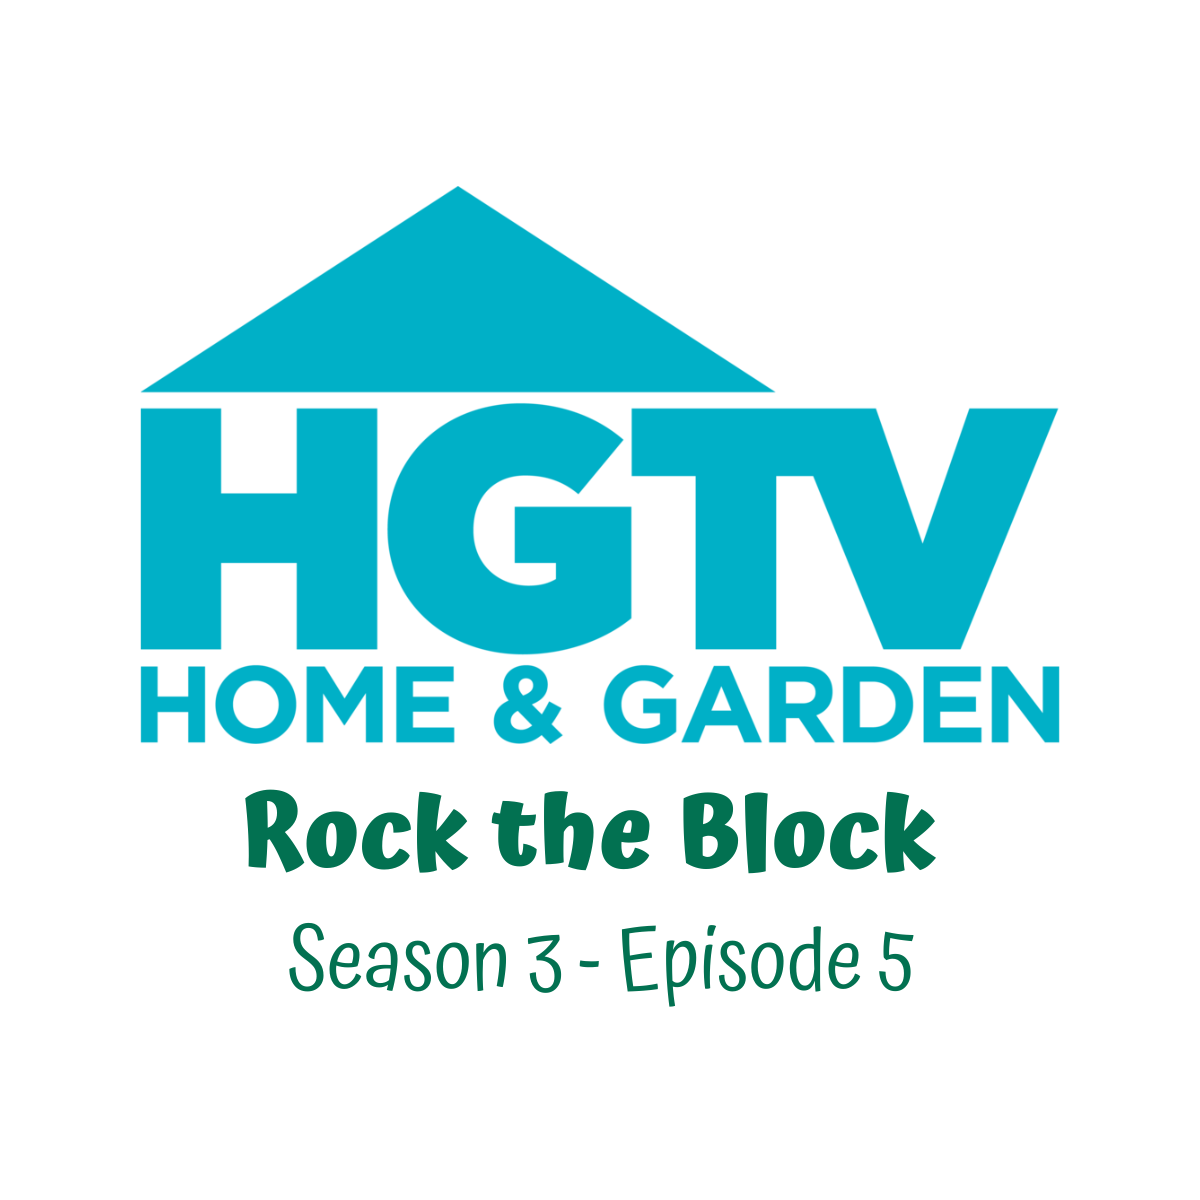 See Varden products in use on HGTV's Rock the Block